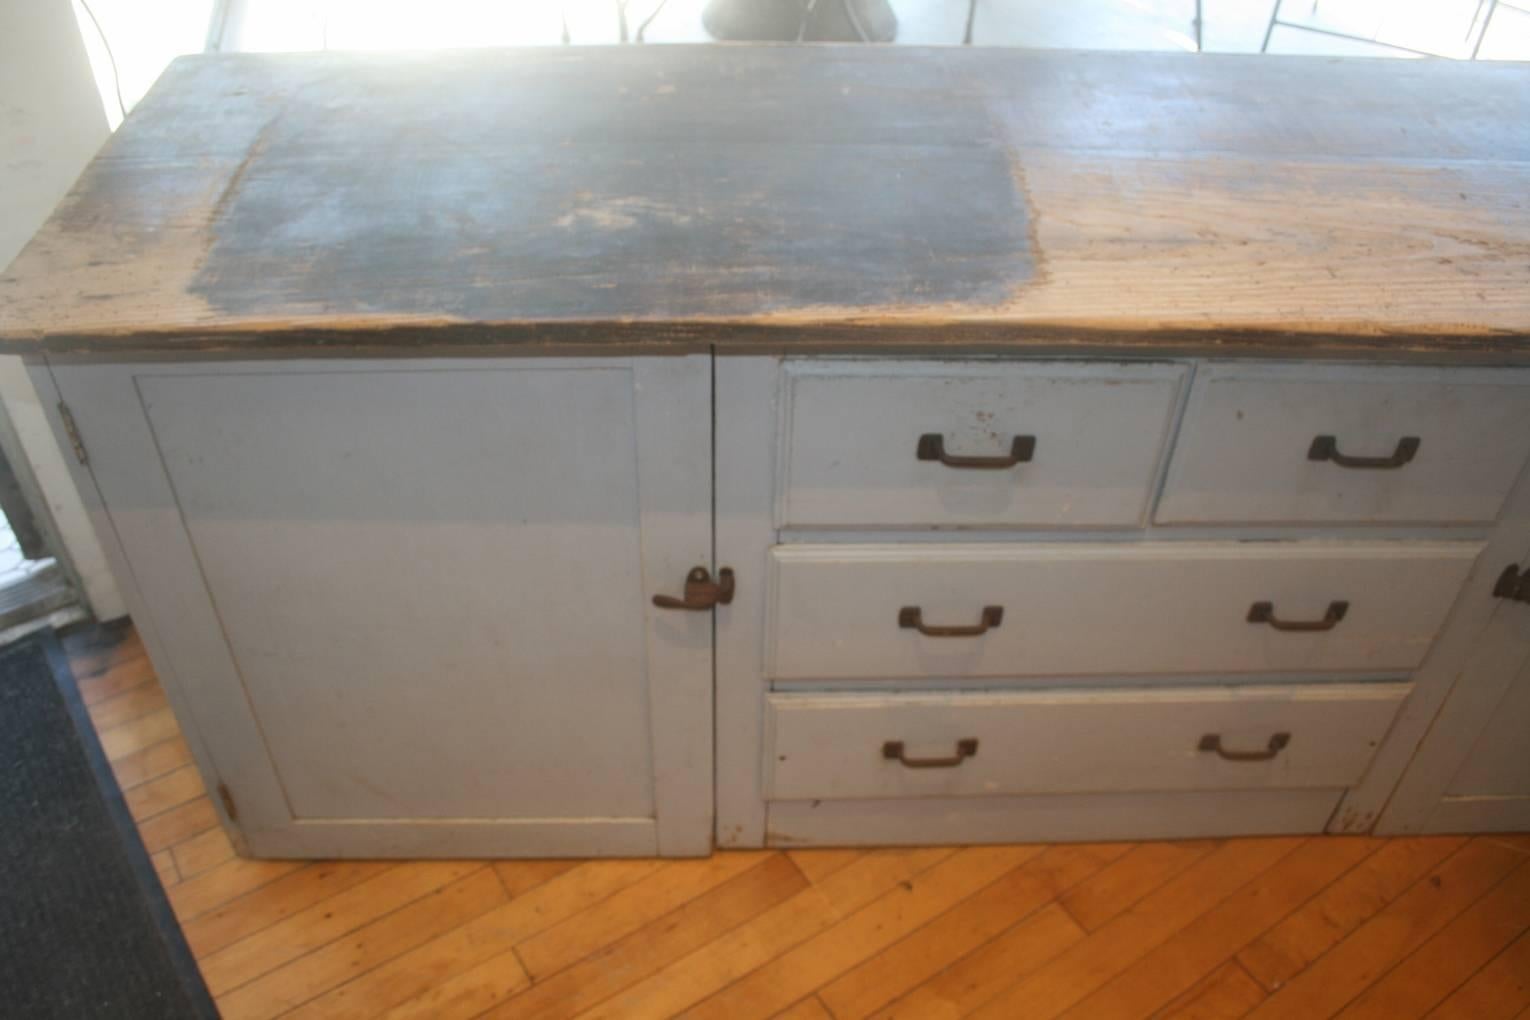 Early 20th Century American Home Made Kitchen Cabinet, circa 1900